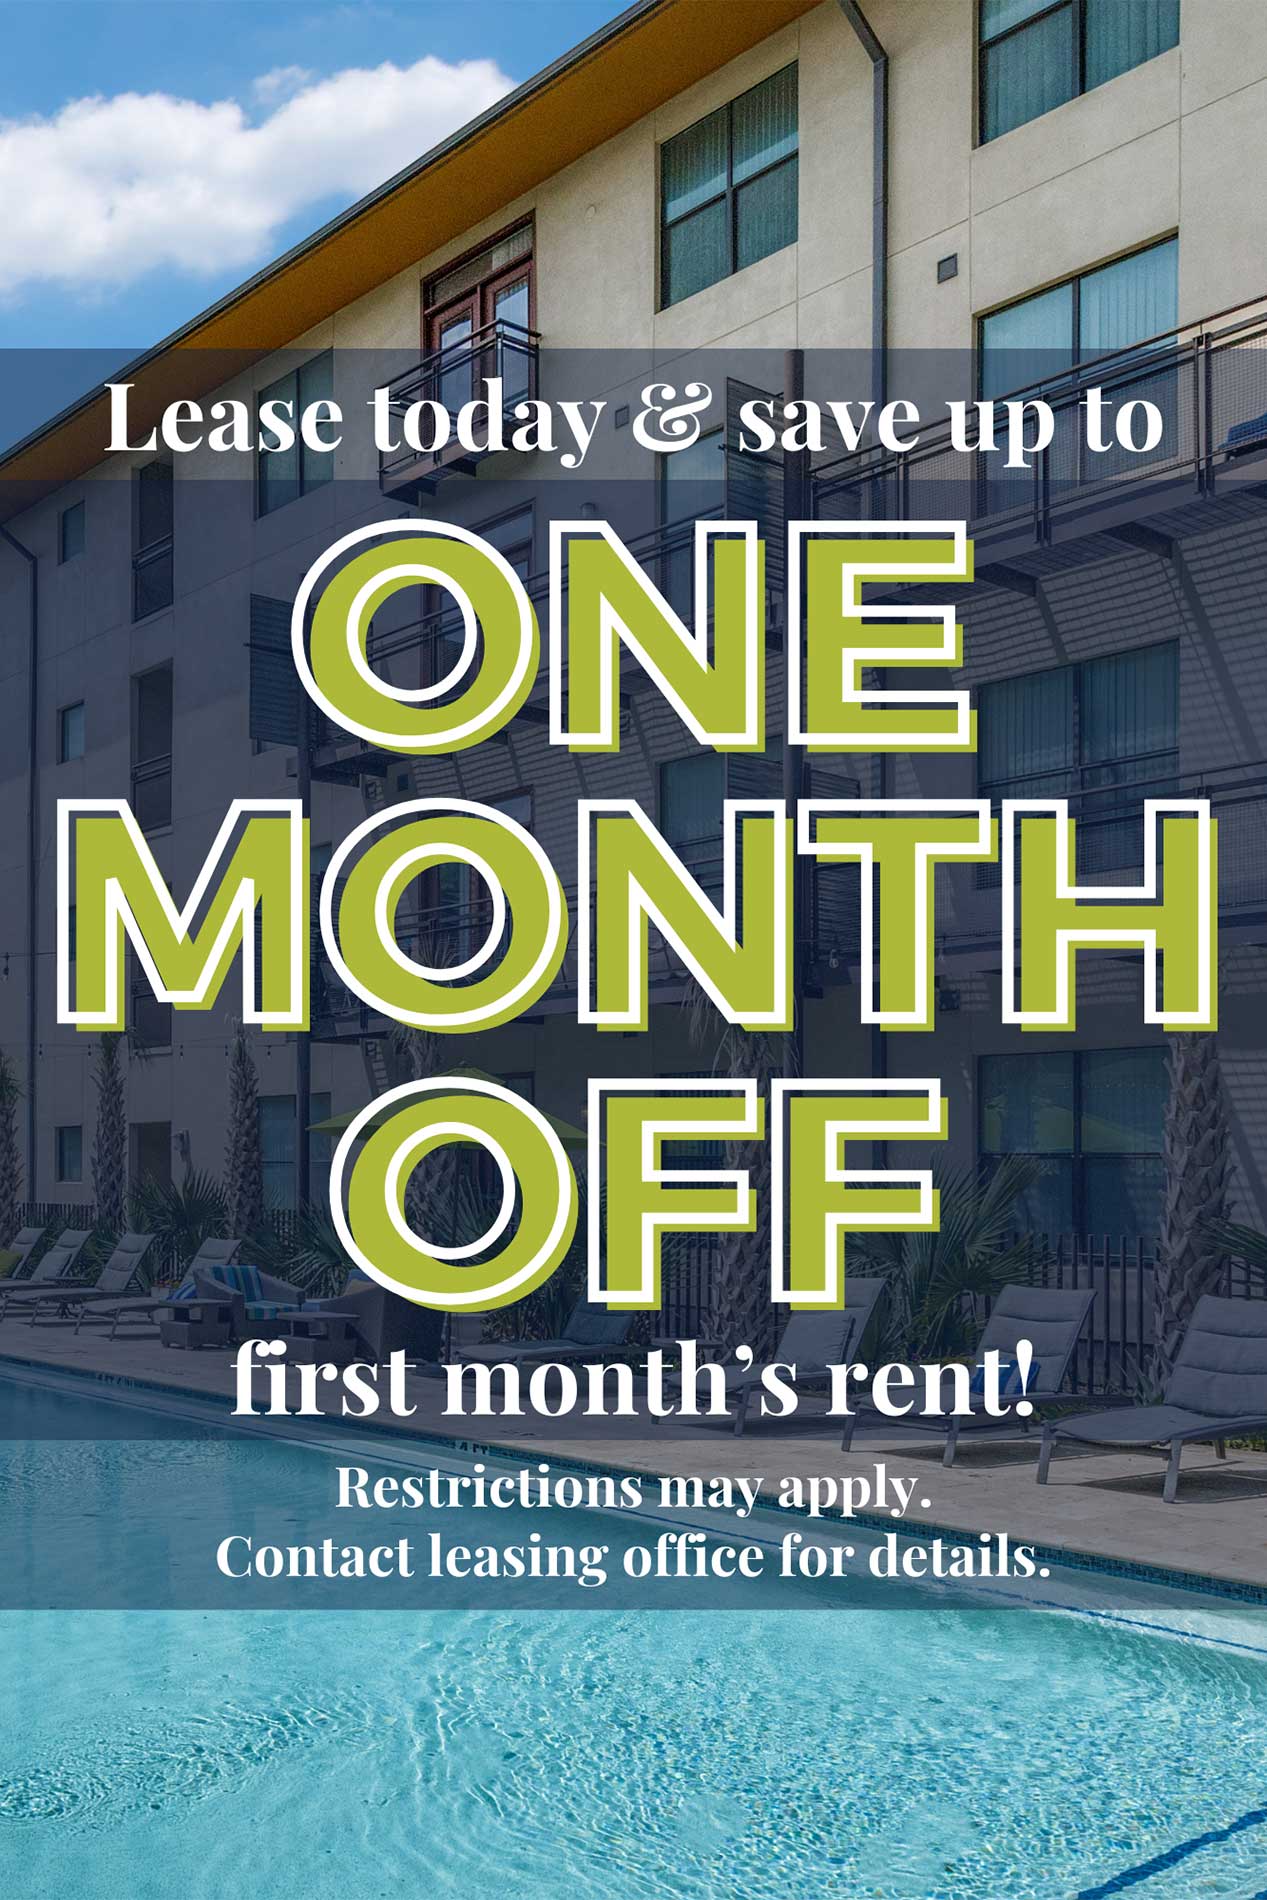 Lease today and save up to one month off first month's rent! Restrictions may apply. Contact leasing office for details.